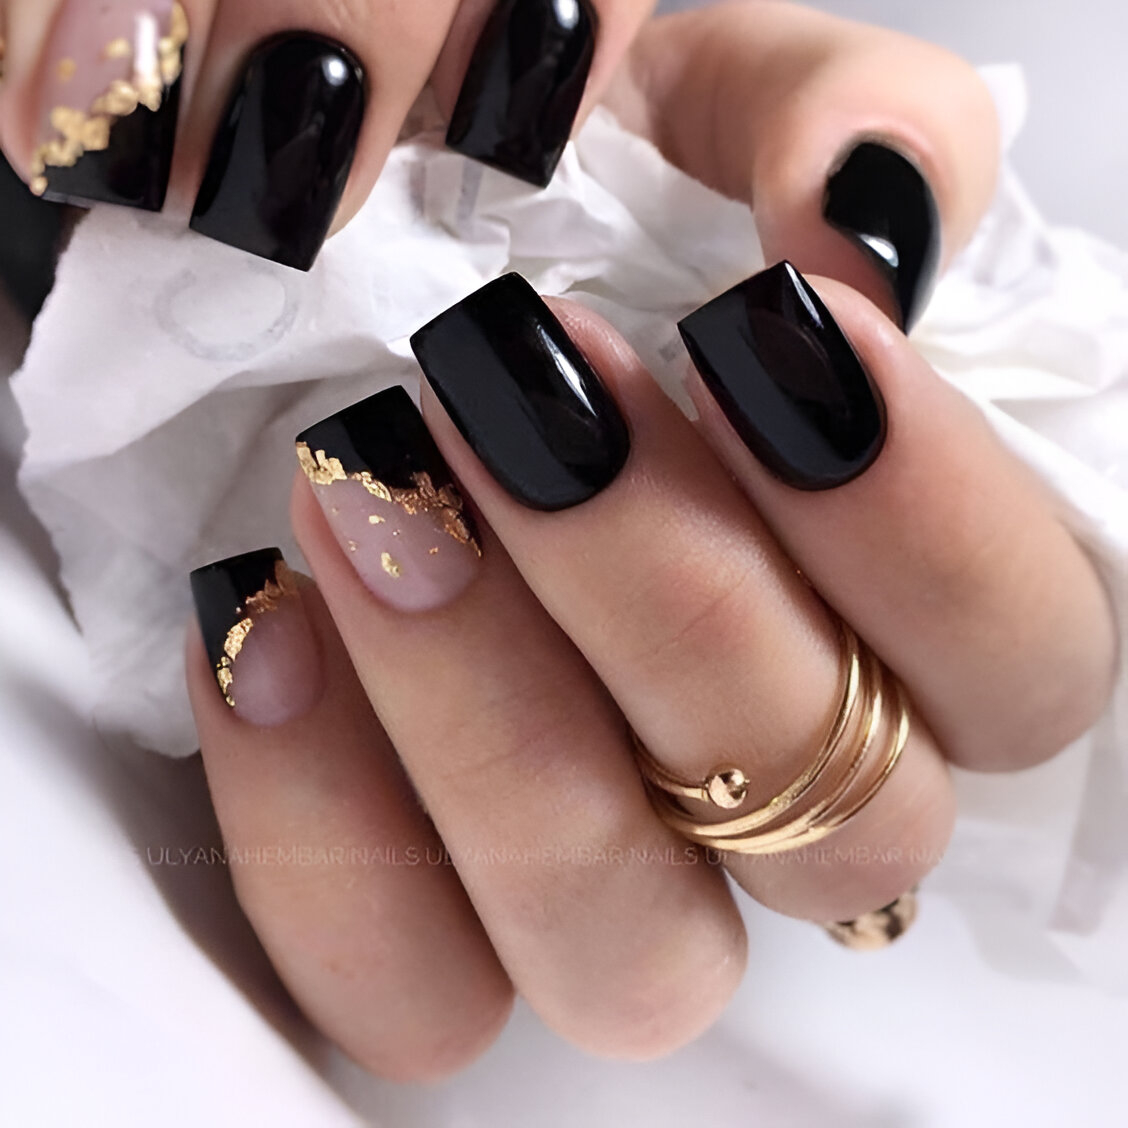 Short Black And Gold Tips